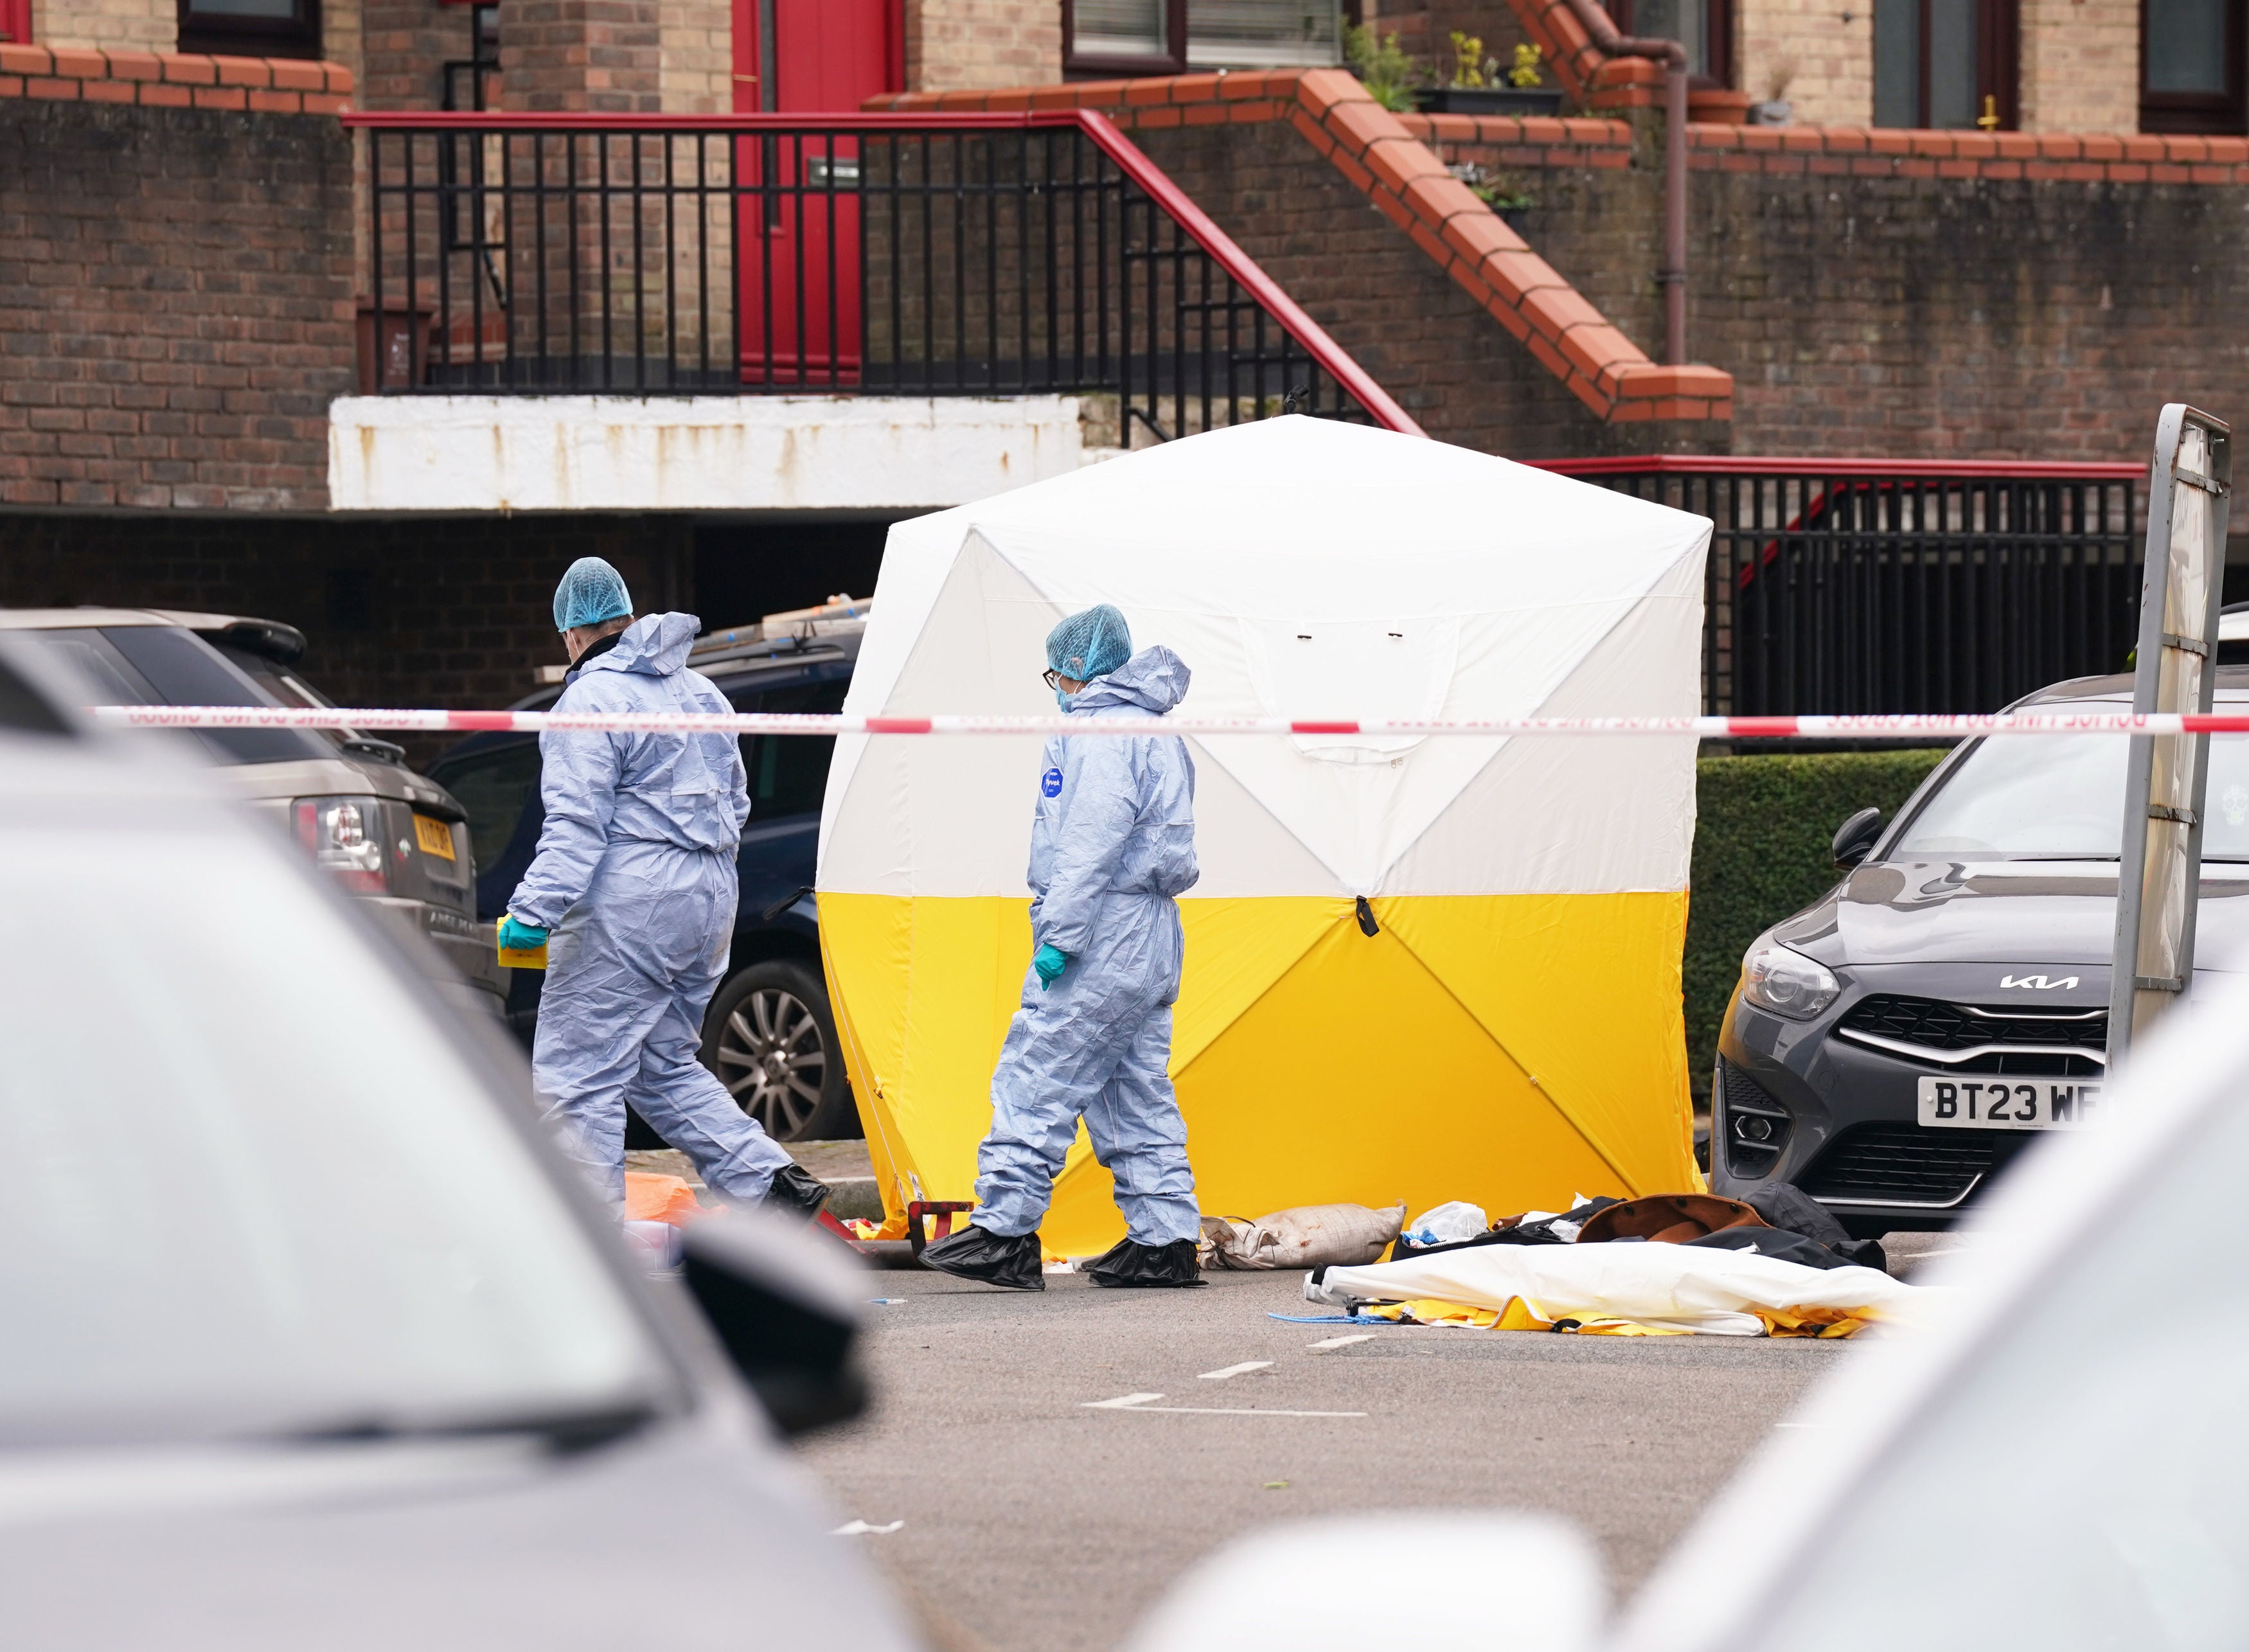 Police forensic officers at the scene near Bywater Place